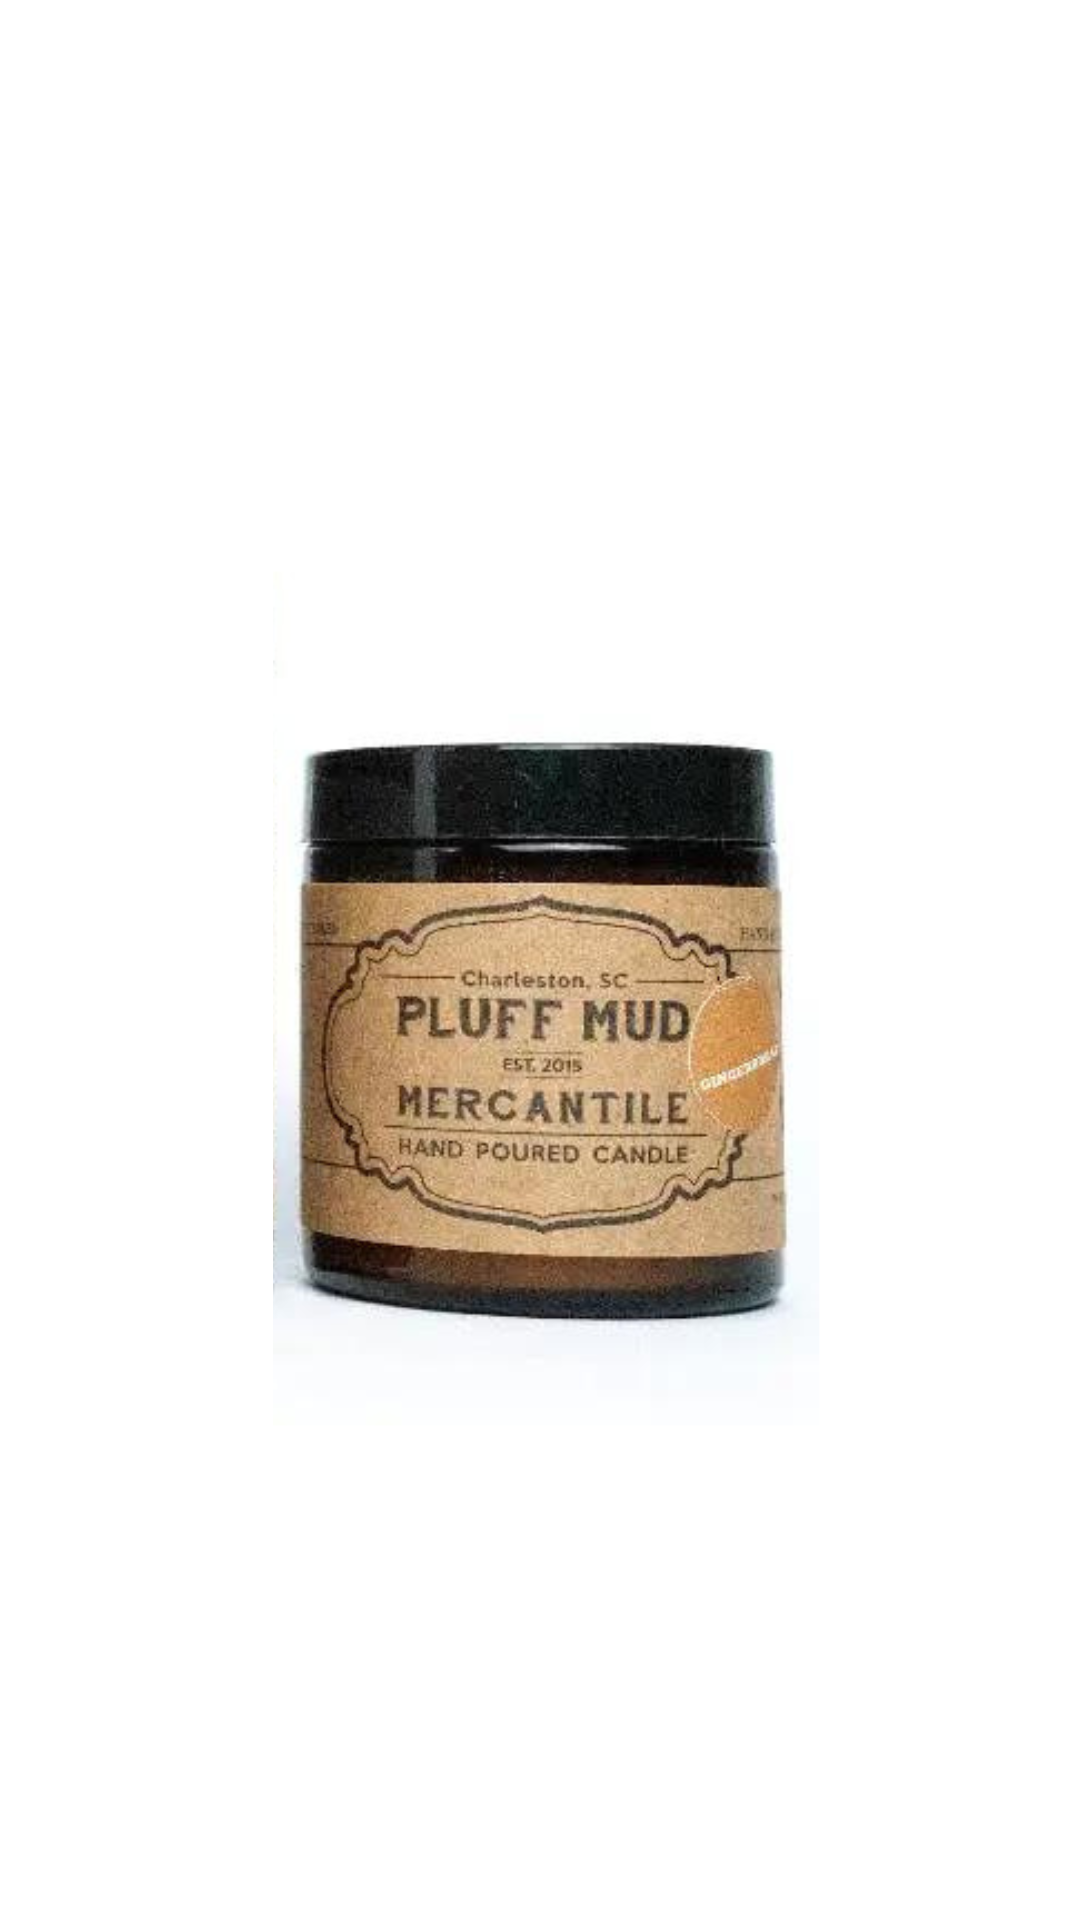 Cornbread Hand Poured Soy Candle - Pluff Mud Mercantile